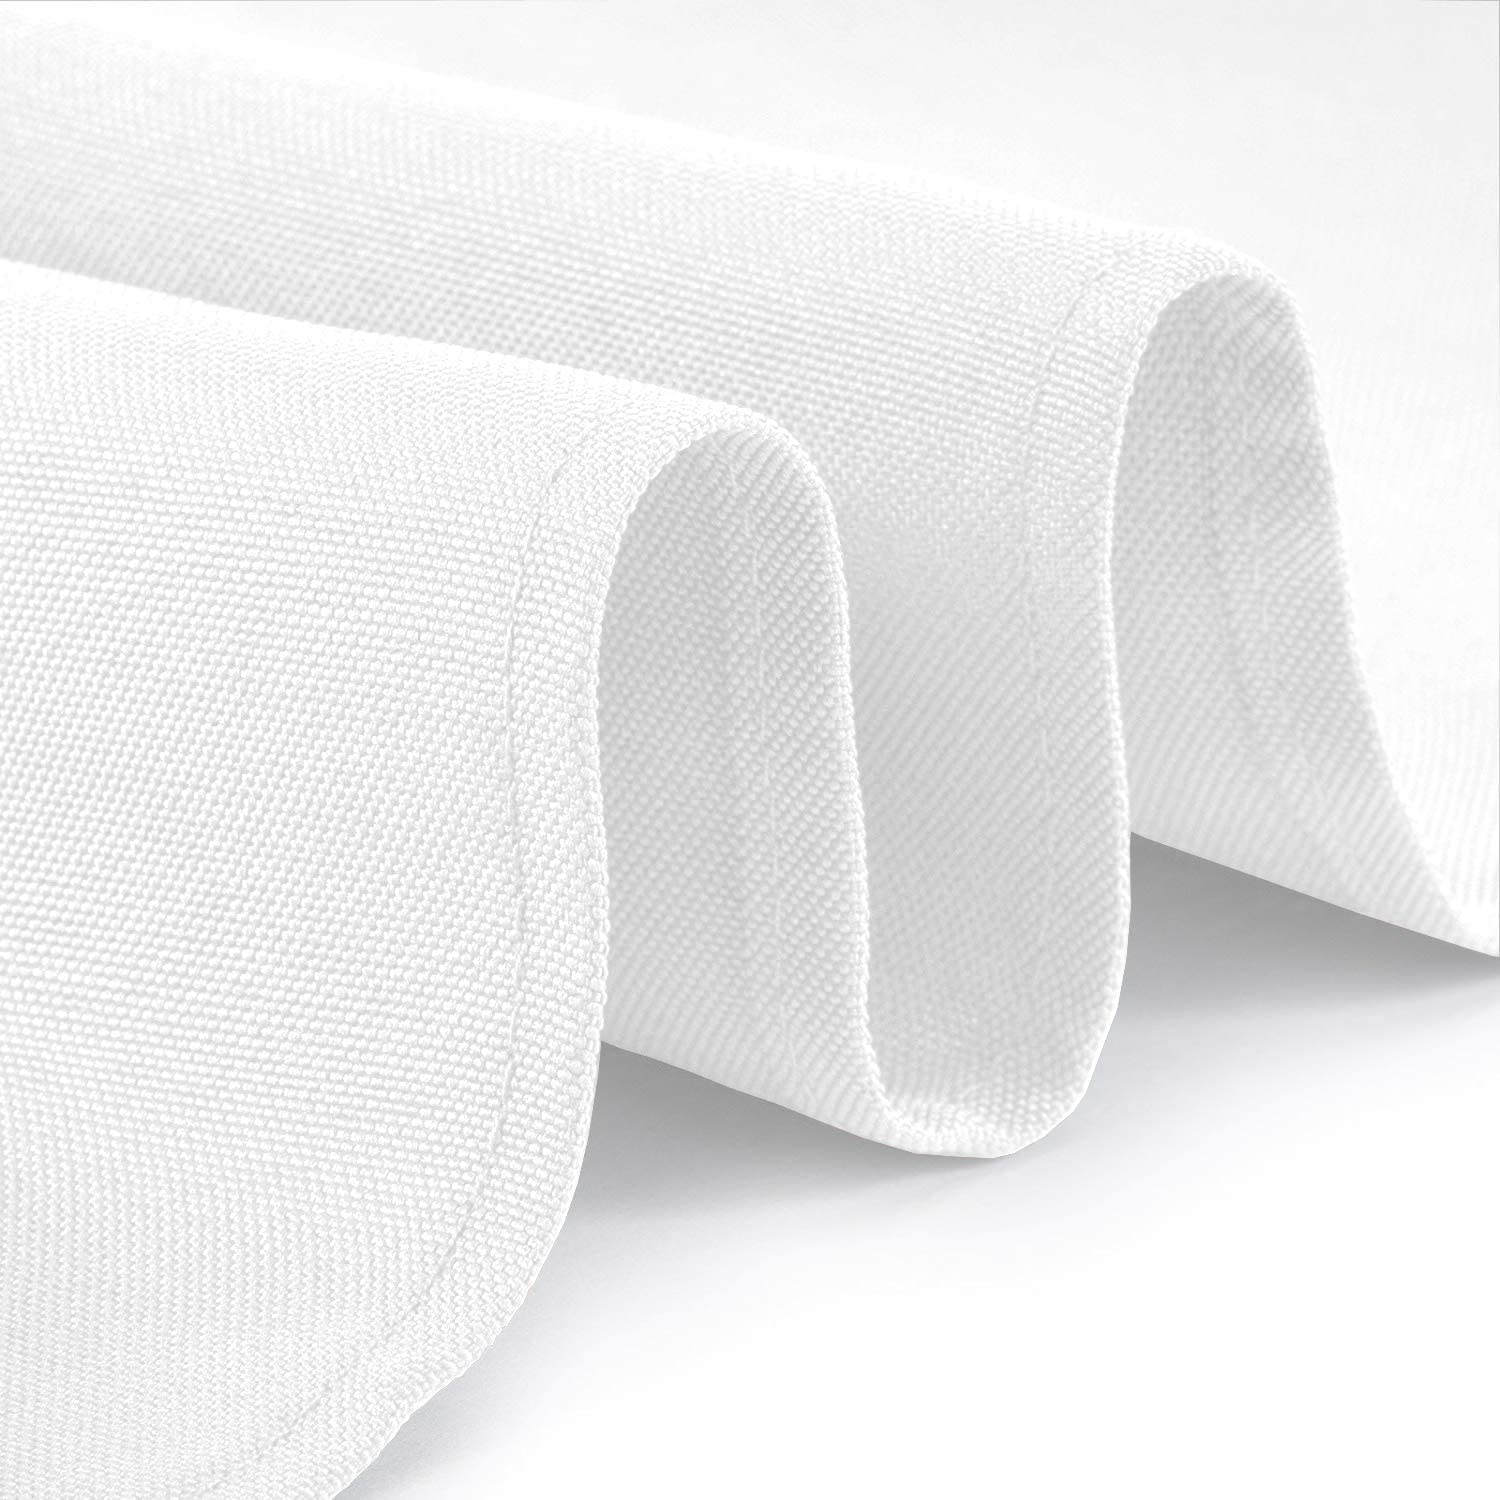 Classic White Tablecloth 90x156 - White Table Clothes for 8 Foot Rectangle Tables, 200 GSM Stain and Wrinkle Resistant Washable Fabric [2 Pack]  - Very Good